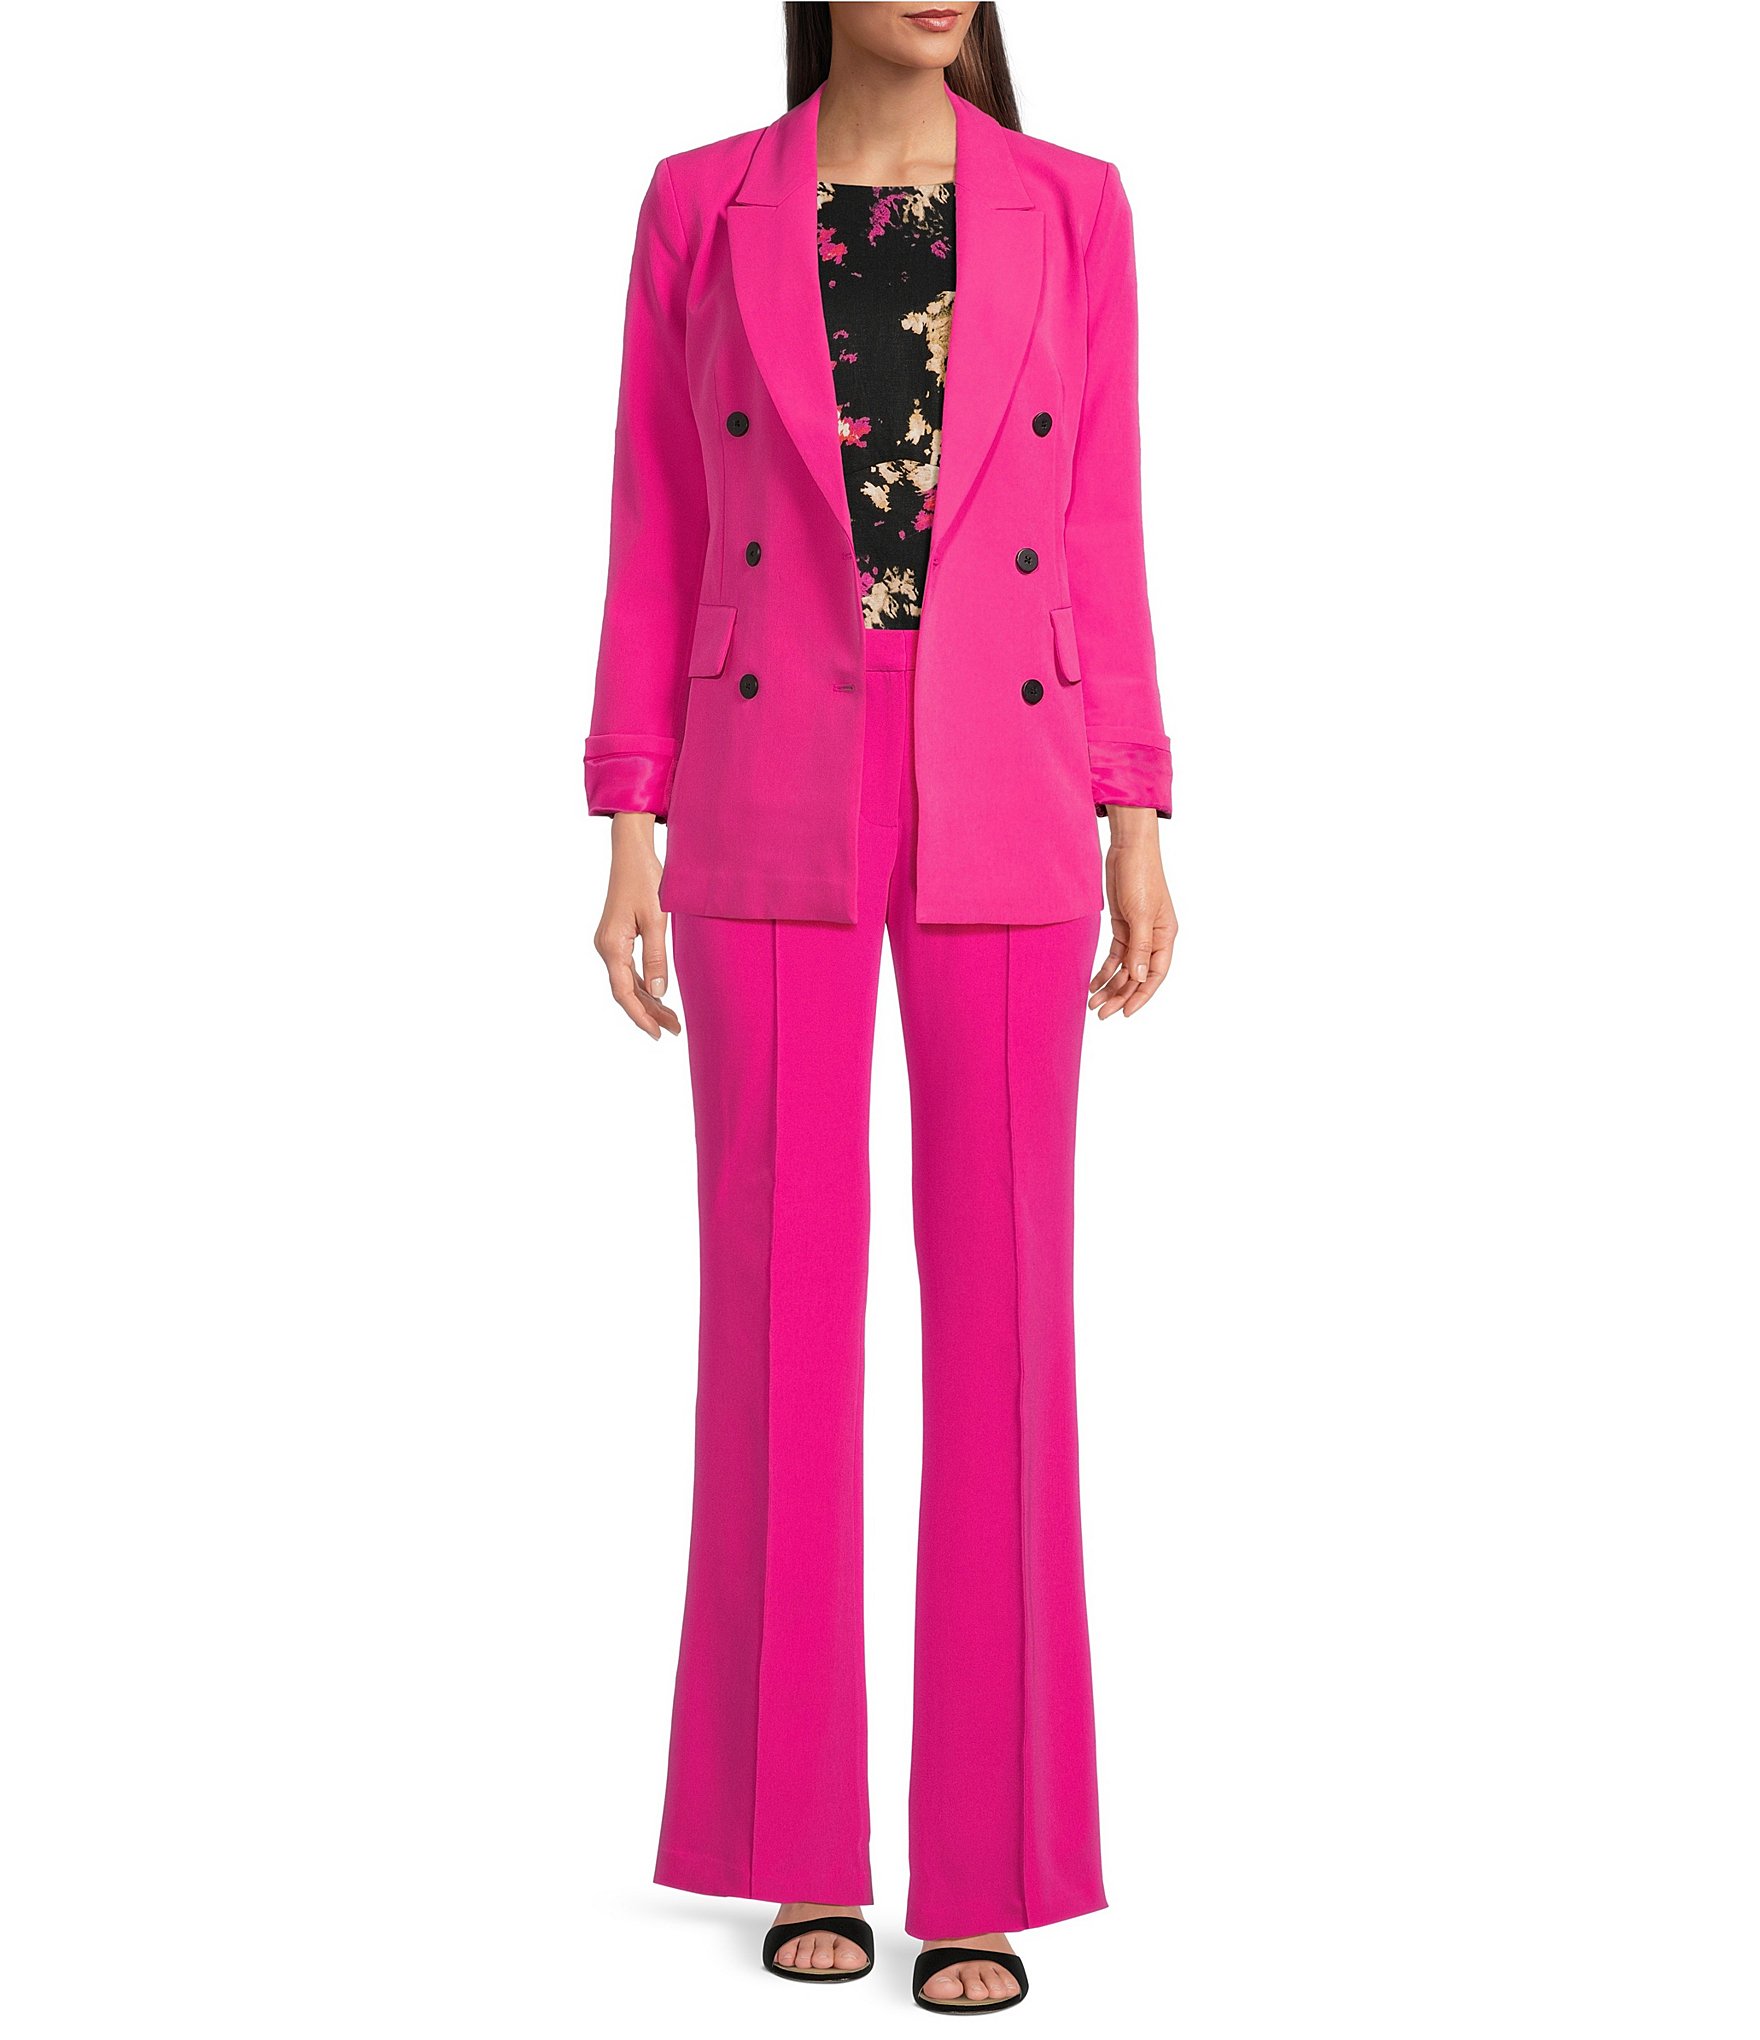 DKNY Stretch Twill Long Sleeve Double Breasted Blazer & Coordinating ...